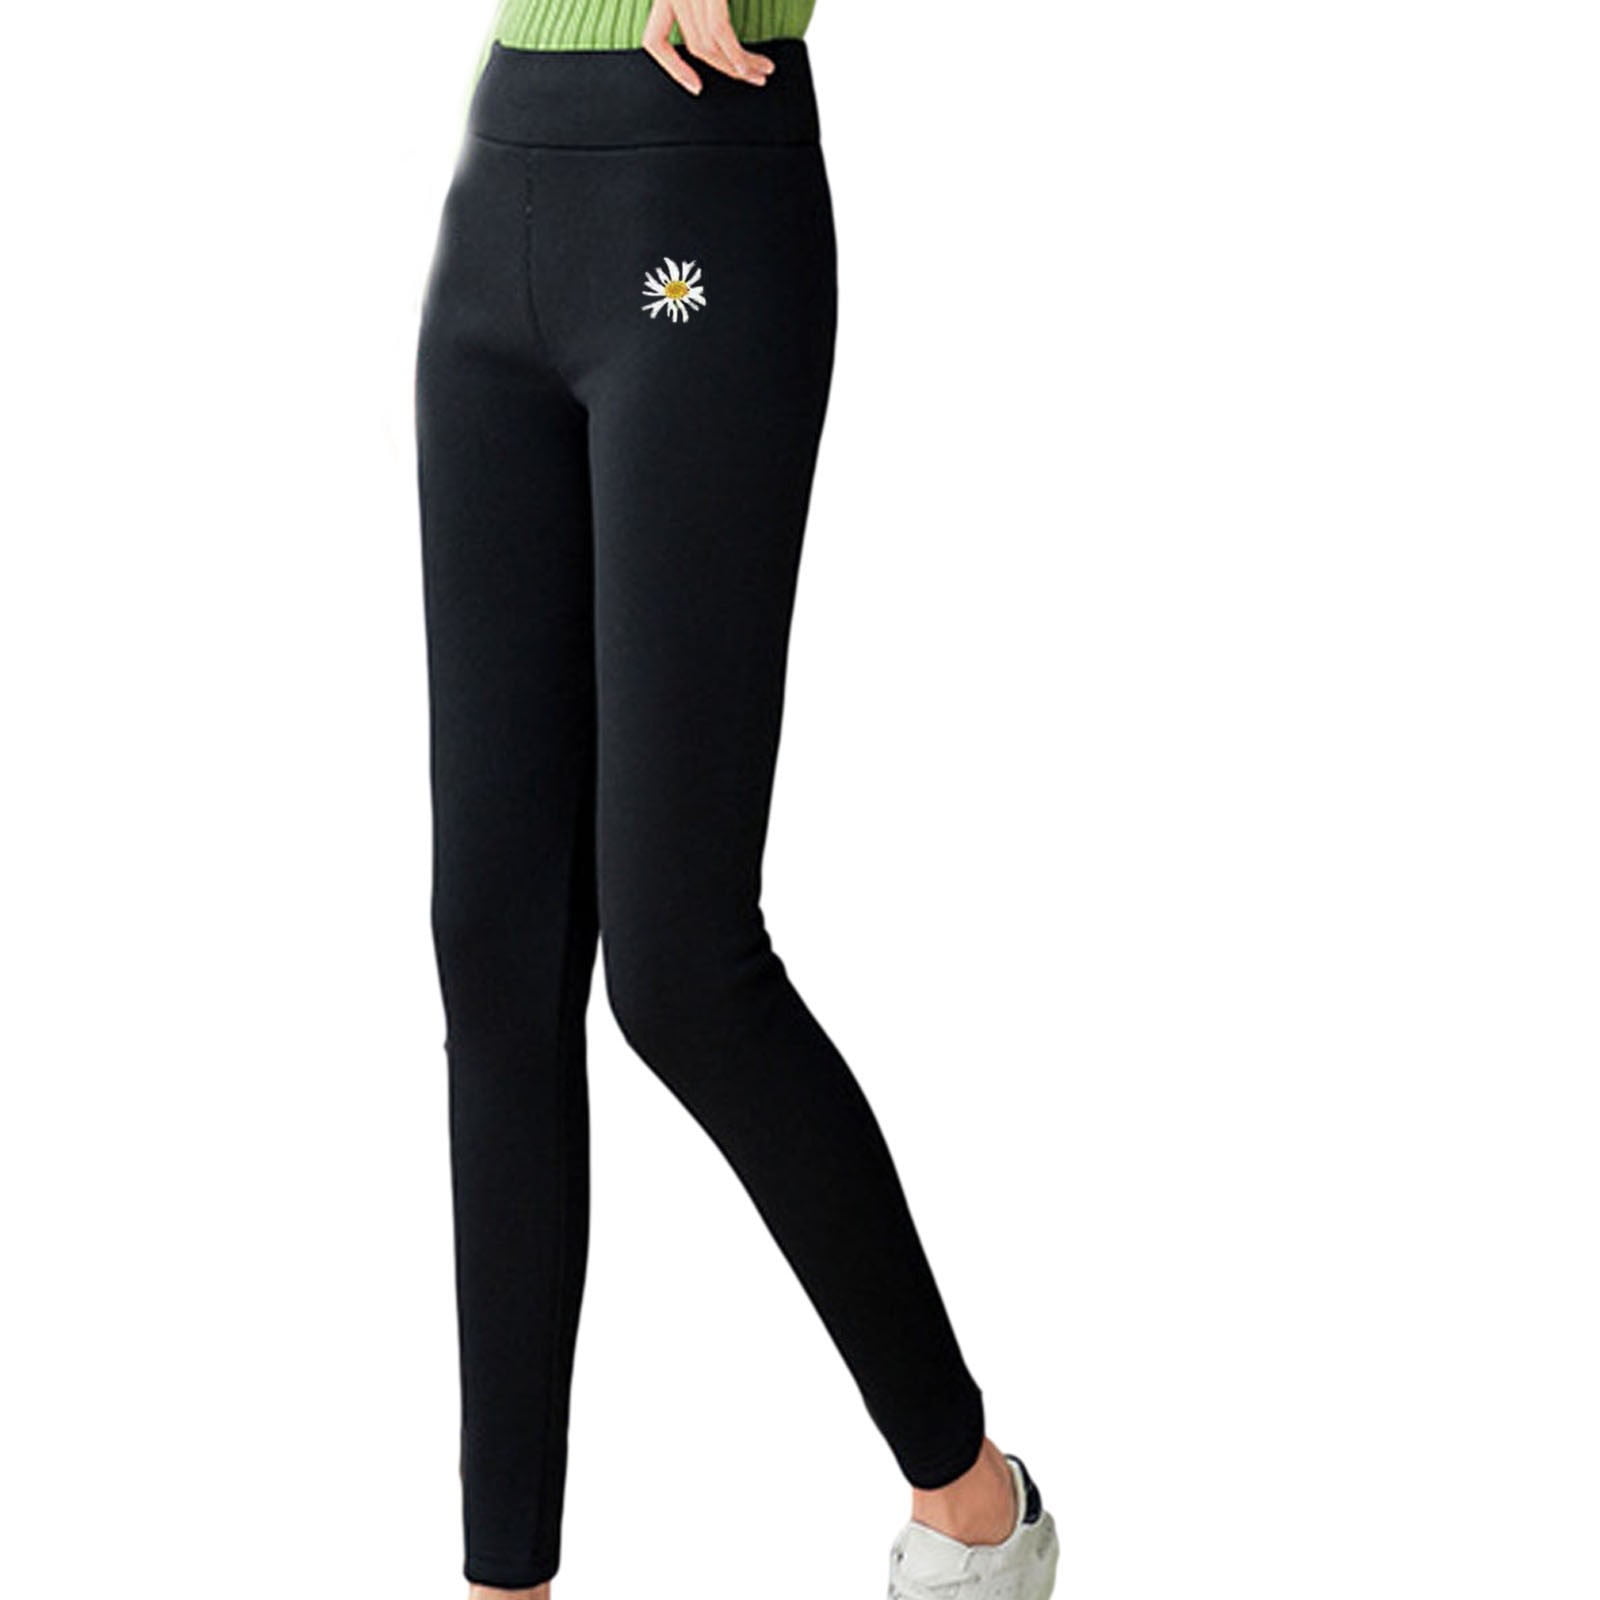 Plus Size Yoga Pants Women Compression Running Calf-length Tights Female  Gym Training Workout Knee Length Leggings with Pocket - AliExpress